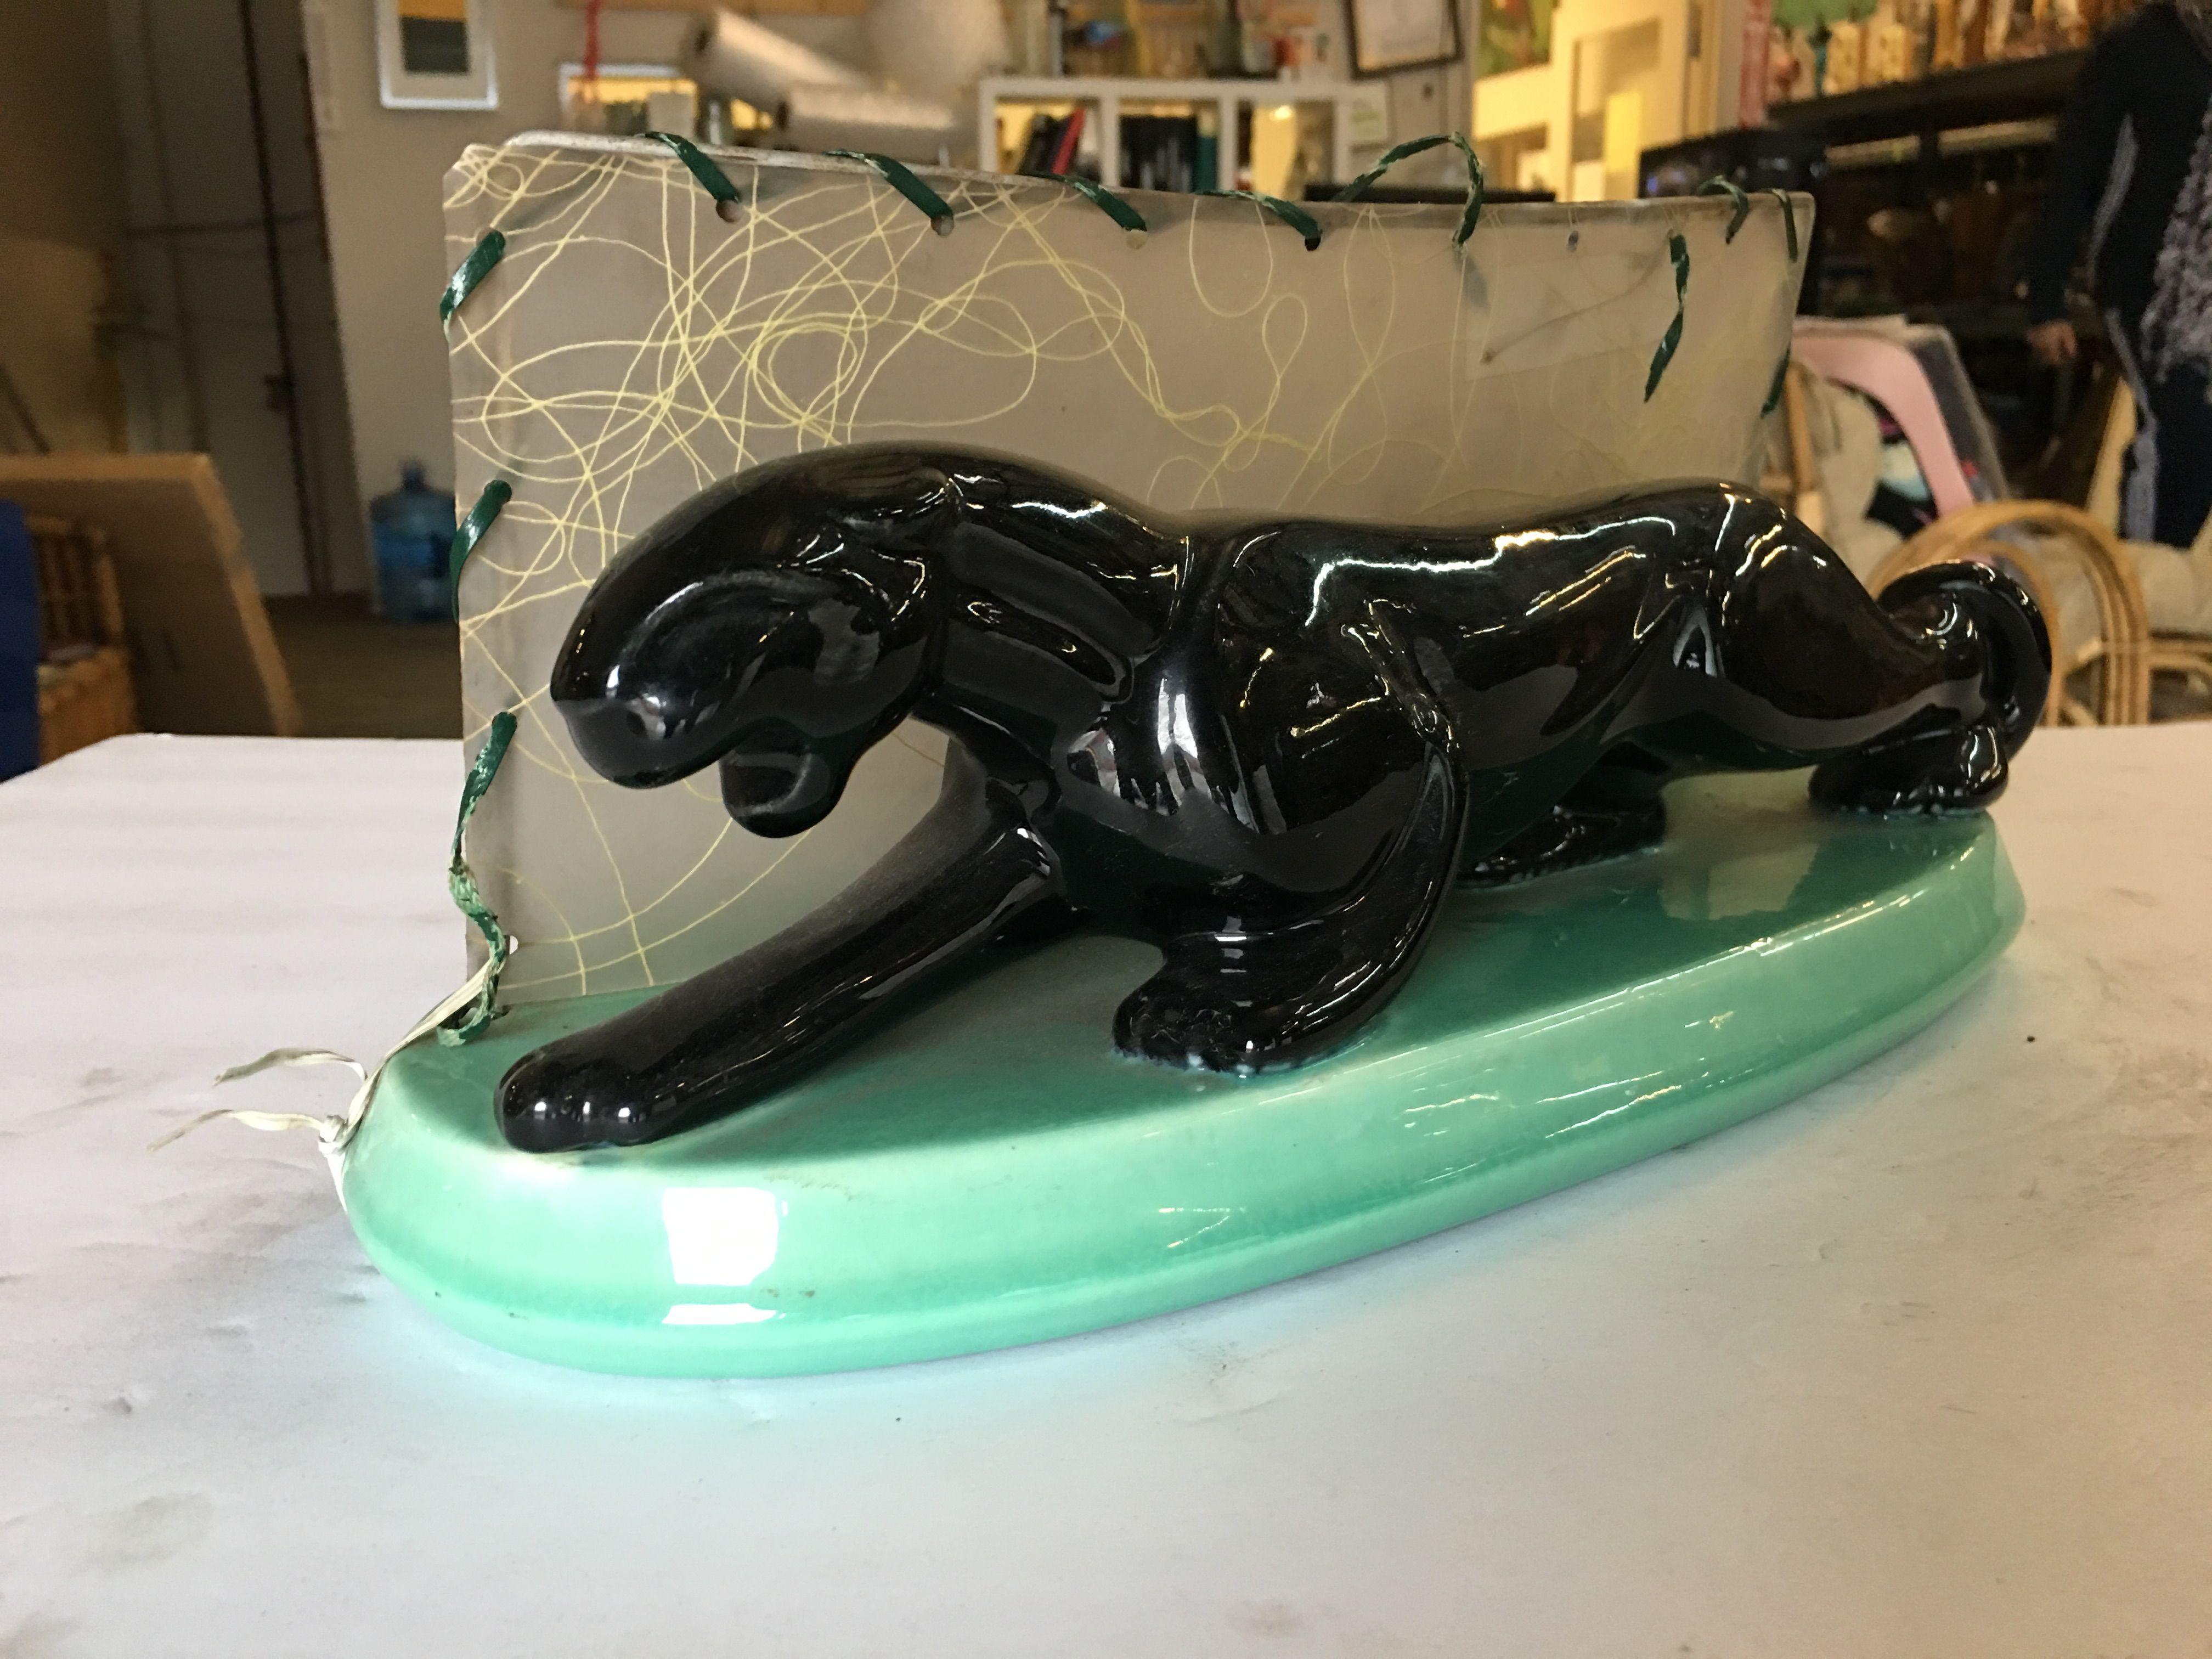 Midcentury panther art pottery ceramic statue lamp featuring a high glazed black finish and detailed form of a panther ready to strike with a backlit Whipple stitch fiberglass shade. This piece is 13 inches long.